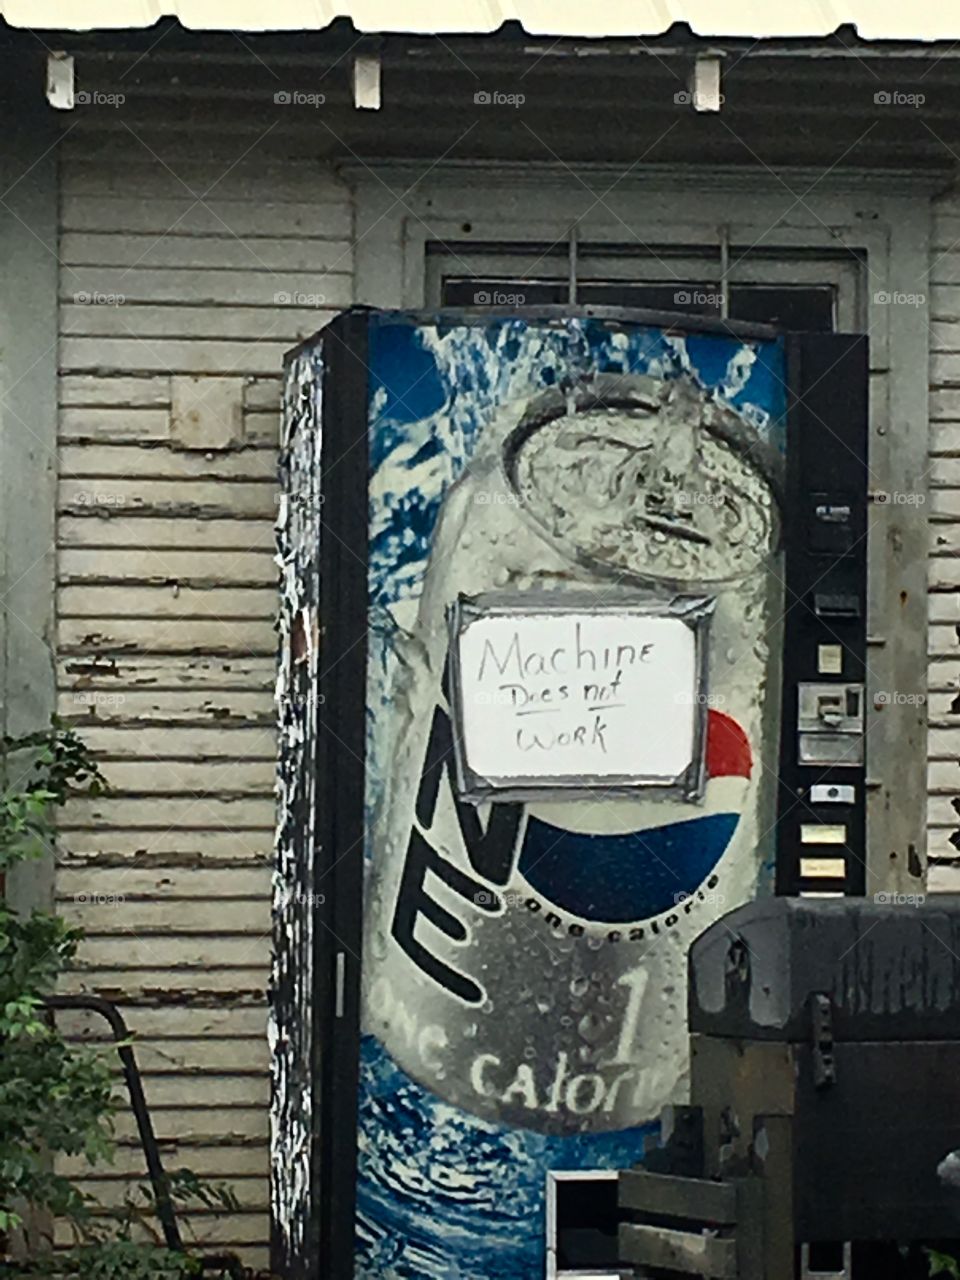 Broken down pop vending machine in an old front porch with a sign that says “Machine Does Not Work” on it.